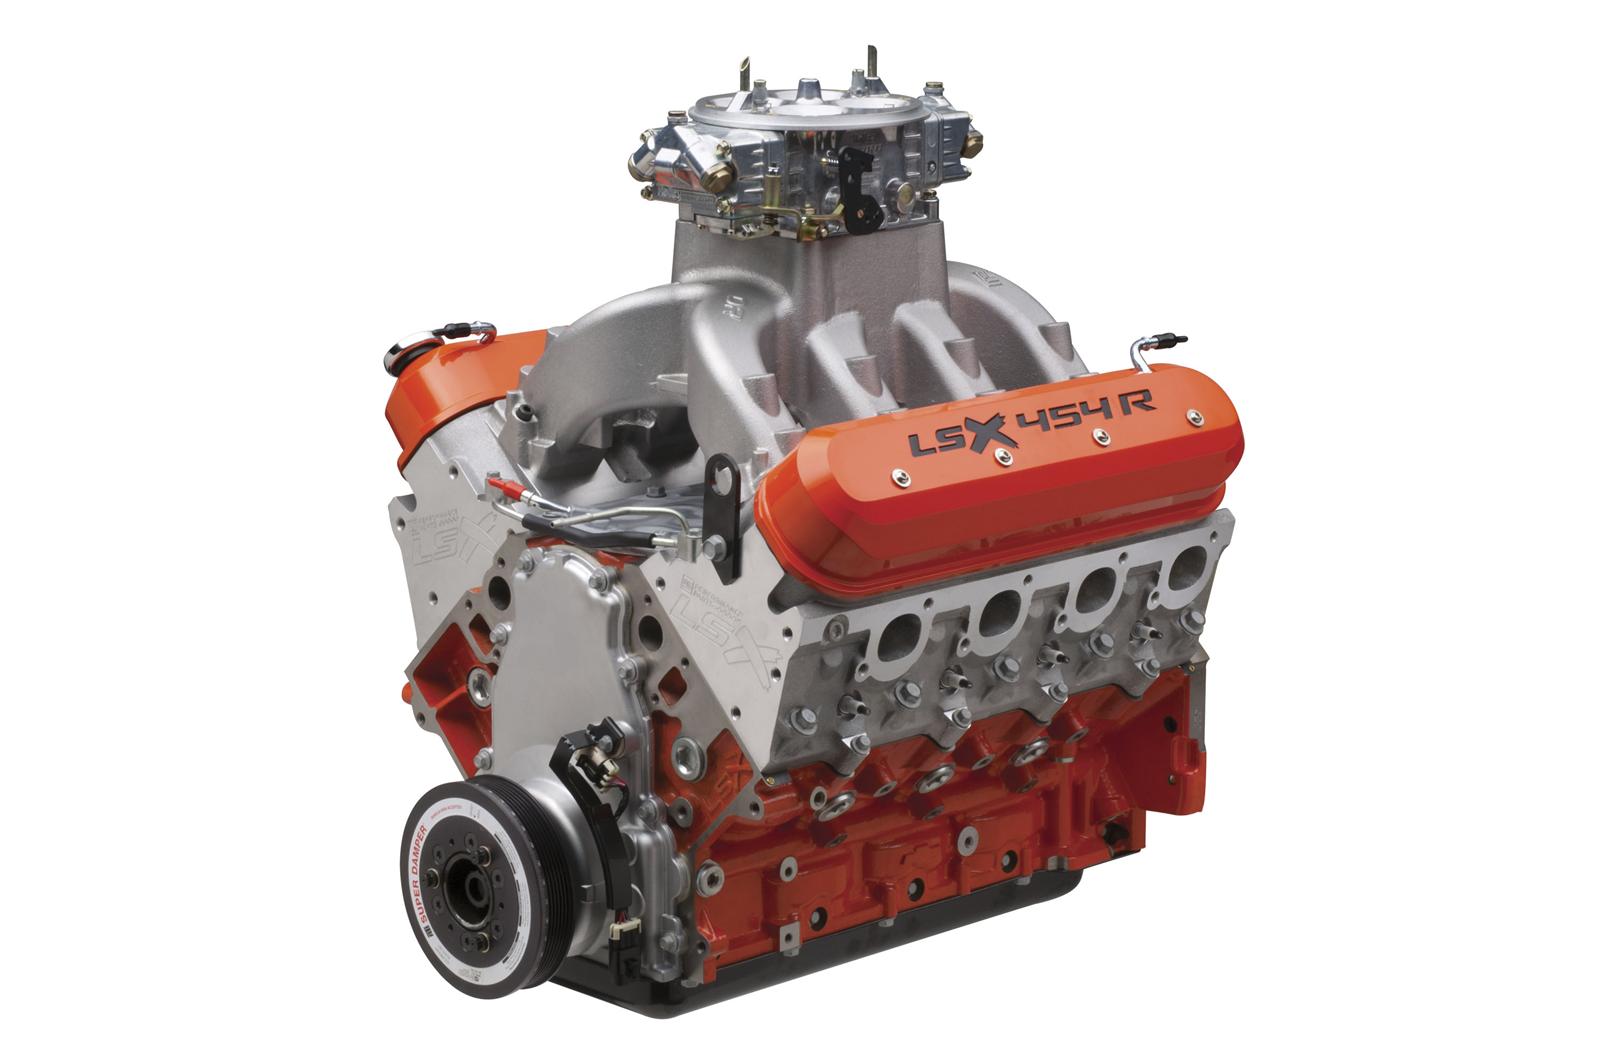 Chevrolet Performance Lsx 454r Crate Engines 19260835 Free Shipping